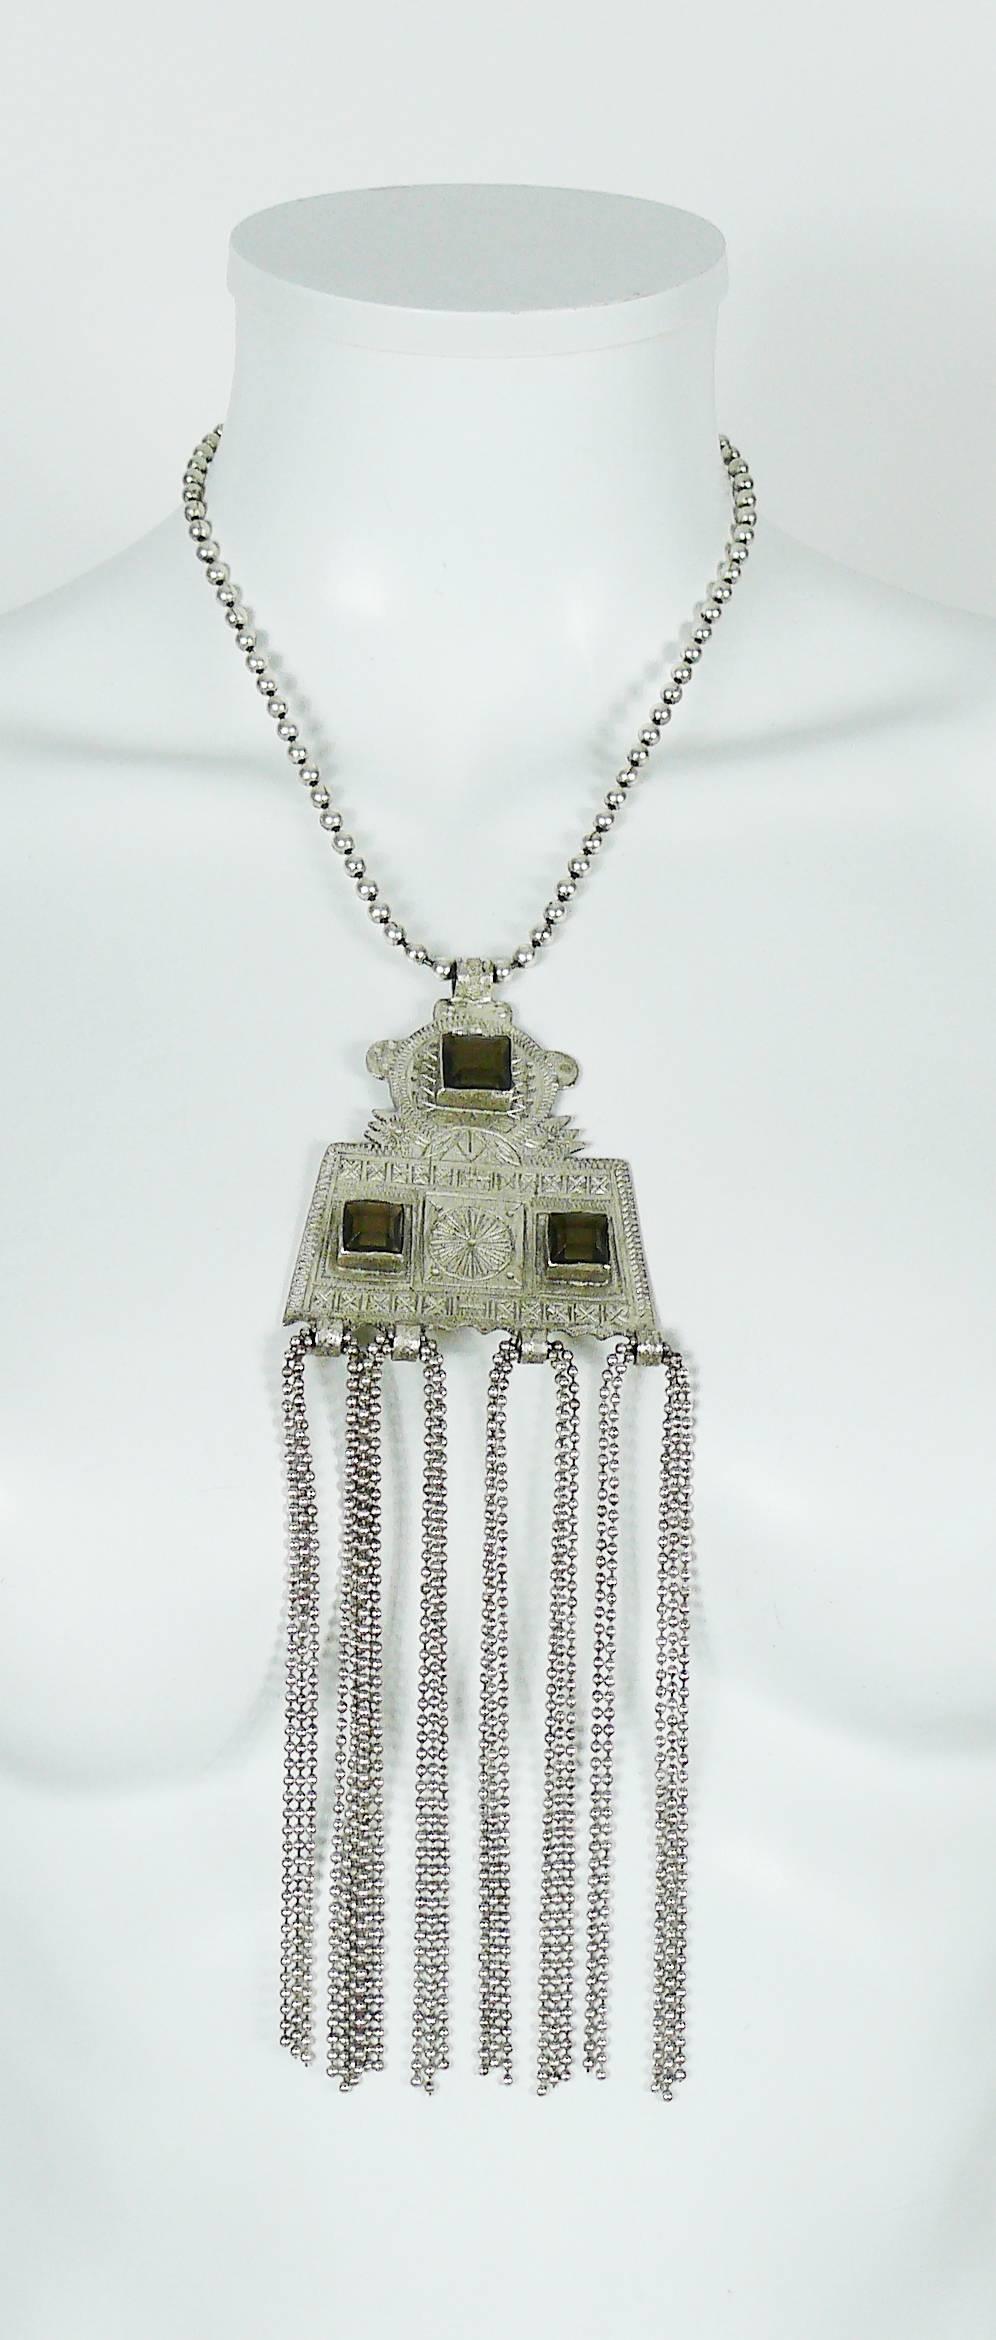 JEAN PAUL GAULTIER antiqued silver toned necklace featuring a Touareg style pendant embellished with smoky topaz resin crystals and tassels.

Ball chain.

Hook clasp.
Extension chain.

Marked GAULTIER.

Indicative measurements : max. chain length